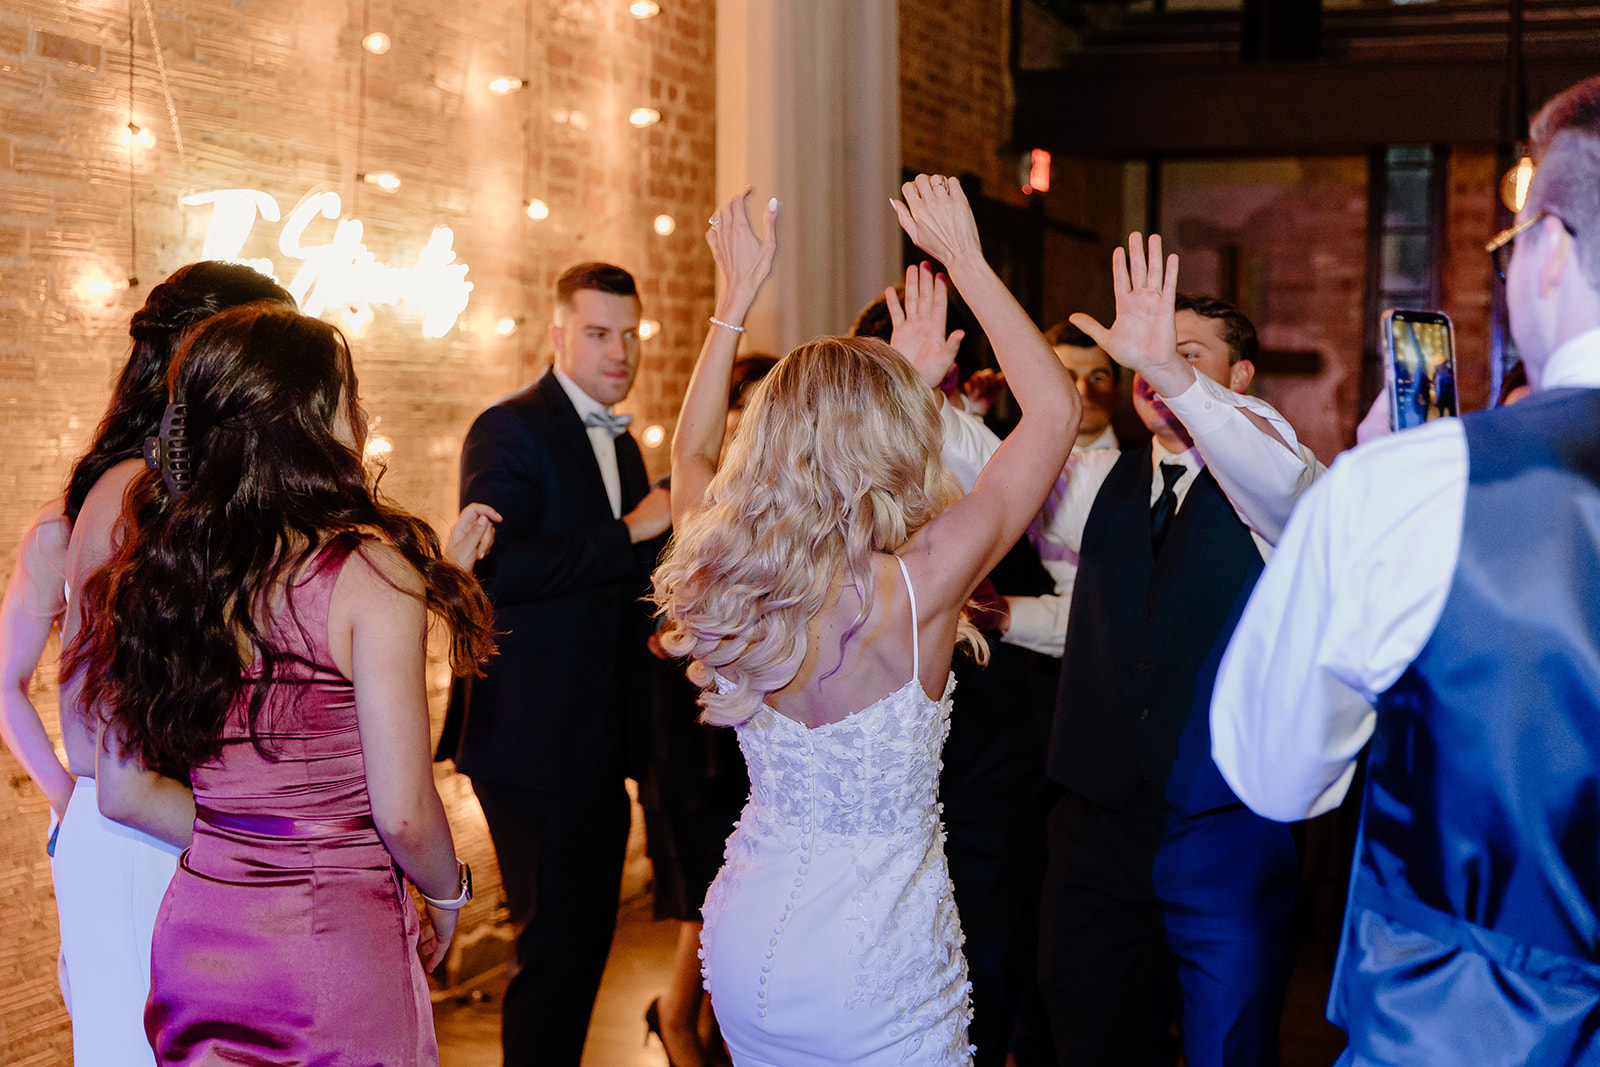 Bride and groom party on the dance floor with all of their wedding guests.